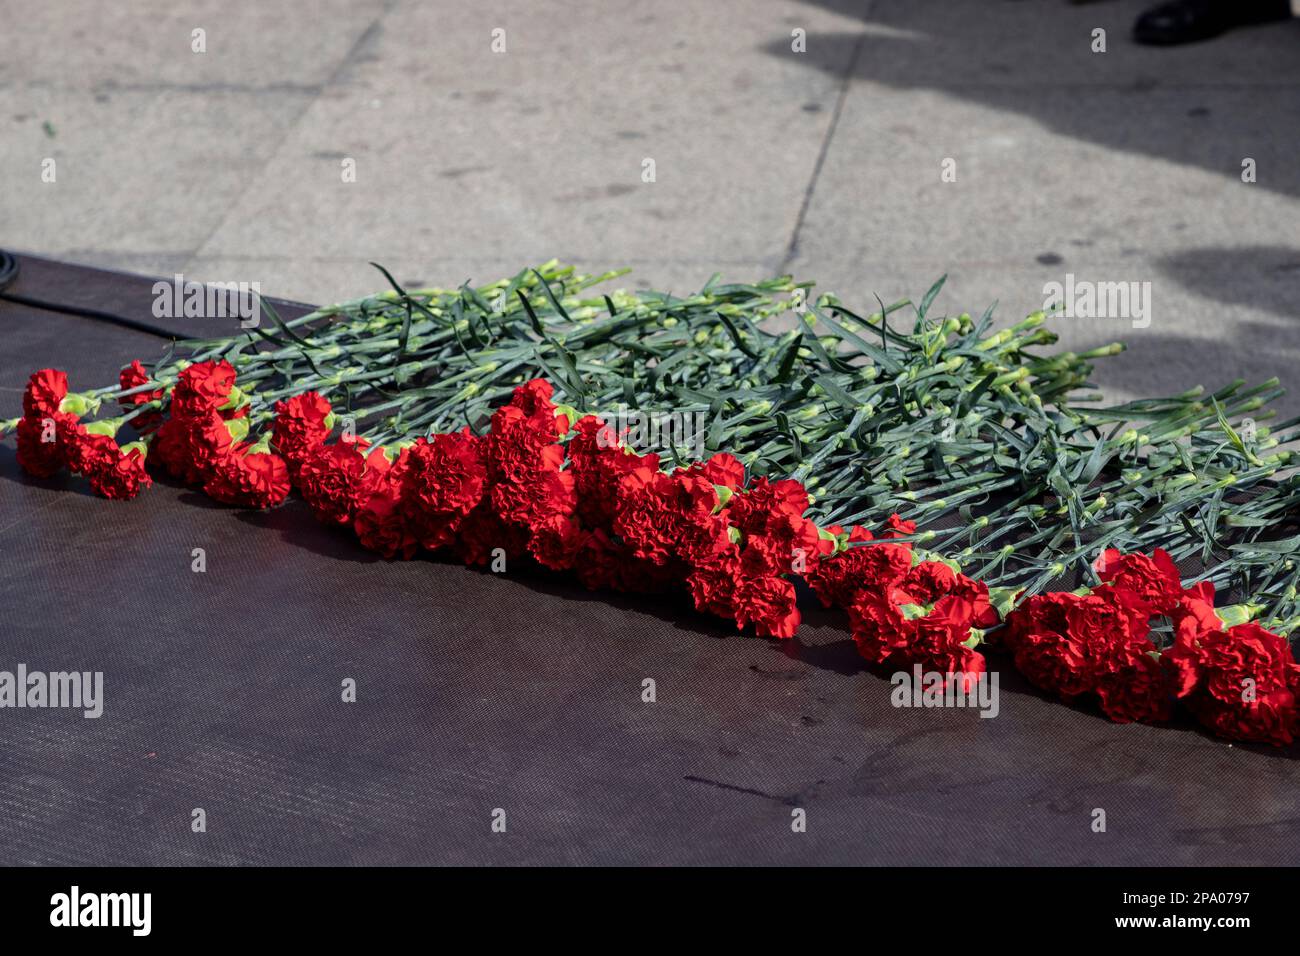 11 M. Attempt. Attack. 11-M Madrid bombings. Floral offering at the Atocha station for the attacks on the Cercanías trains. 2004 bombings Stock Photo